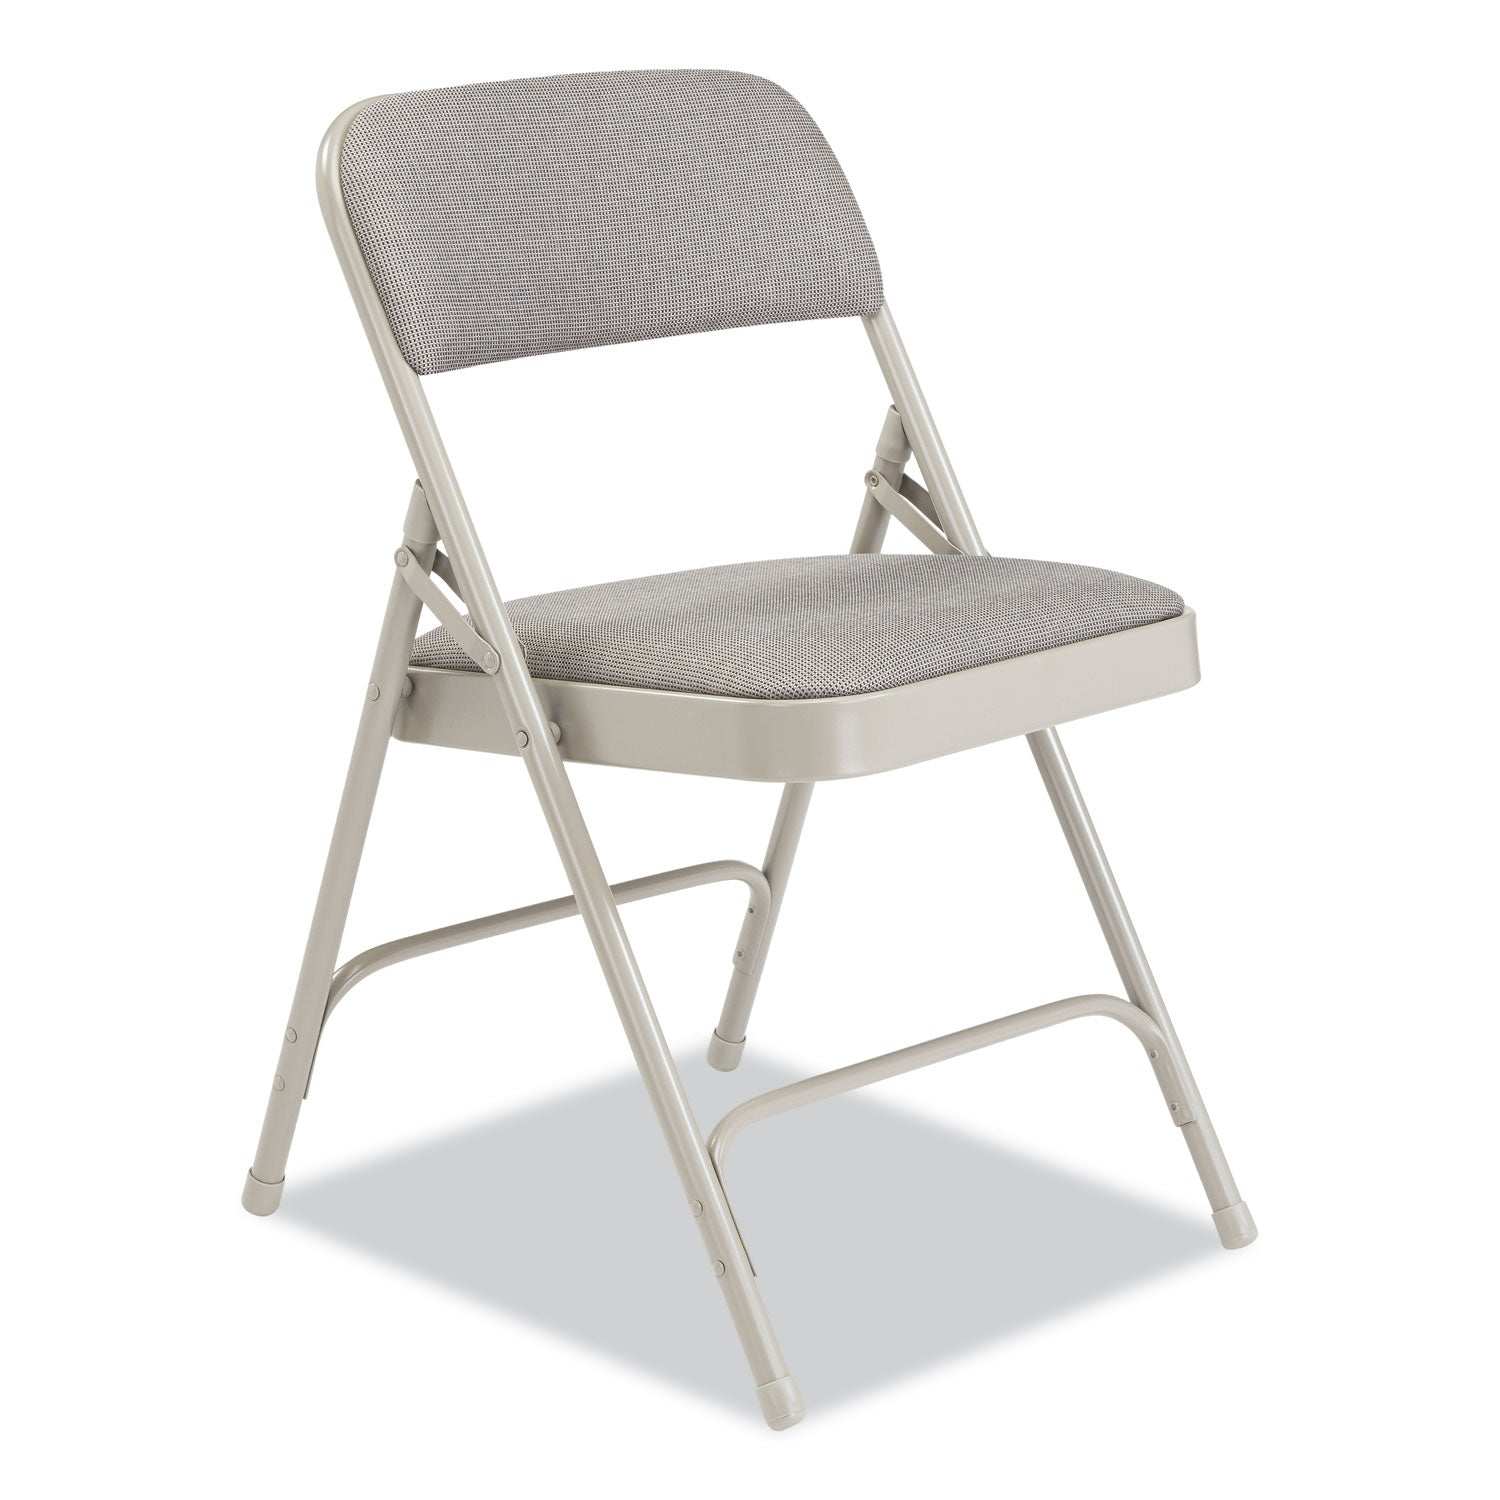 2200-series-fabric-dual-hinge-premium-folding-chair-supports-500lbgreystone-seat-backgray-base4-ct-ships-in-1-3-bus-days_nps2202 - 2